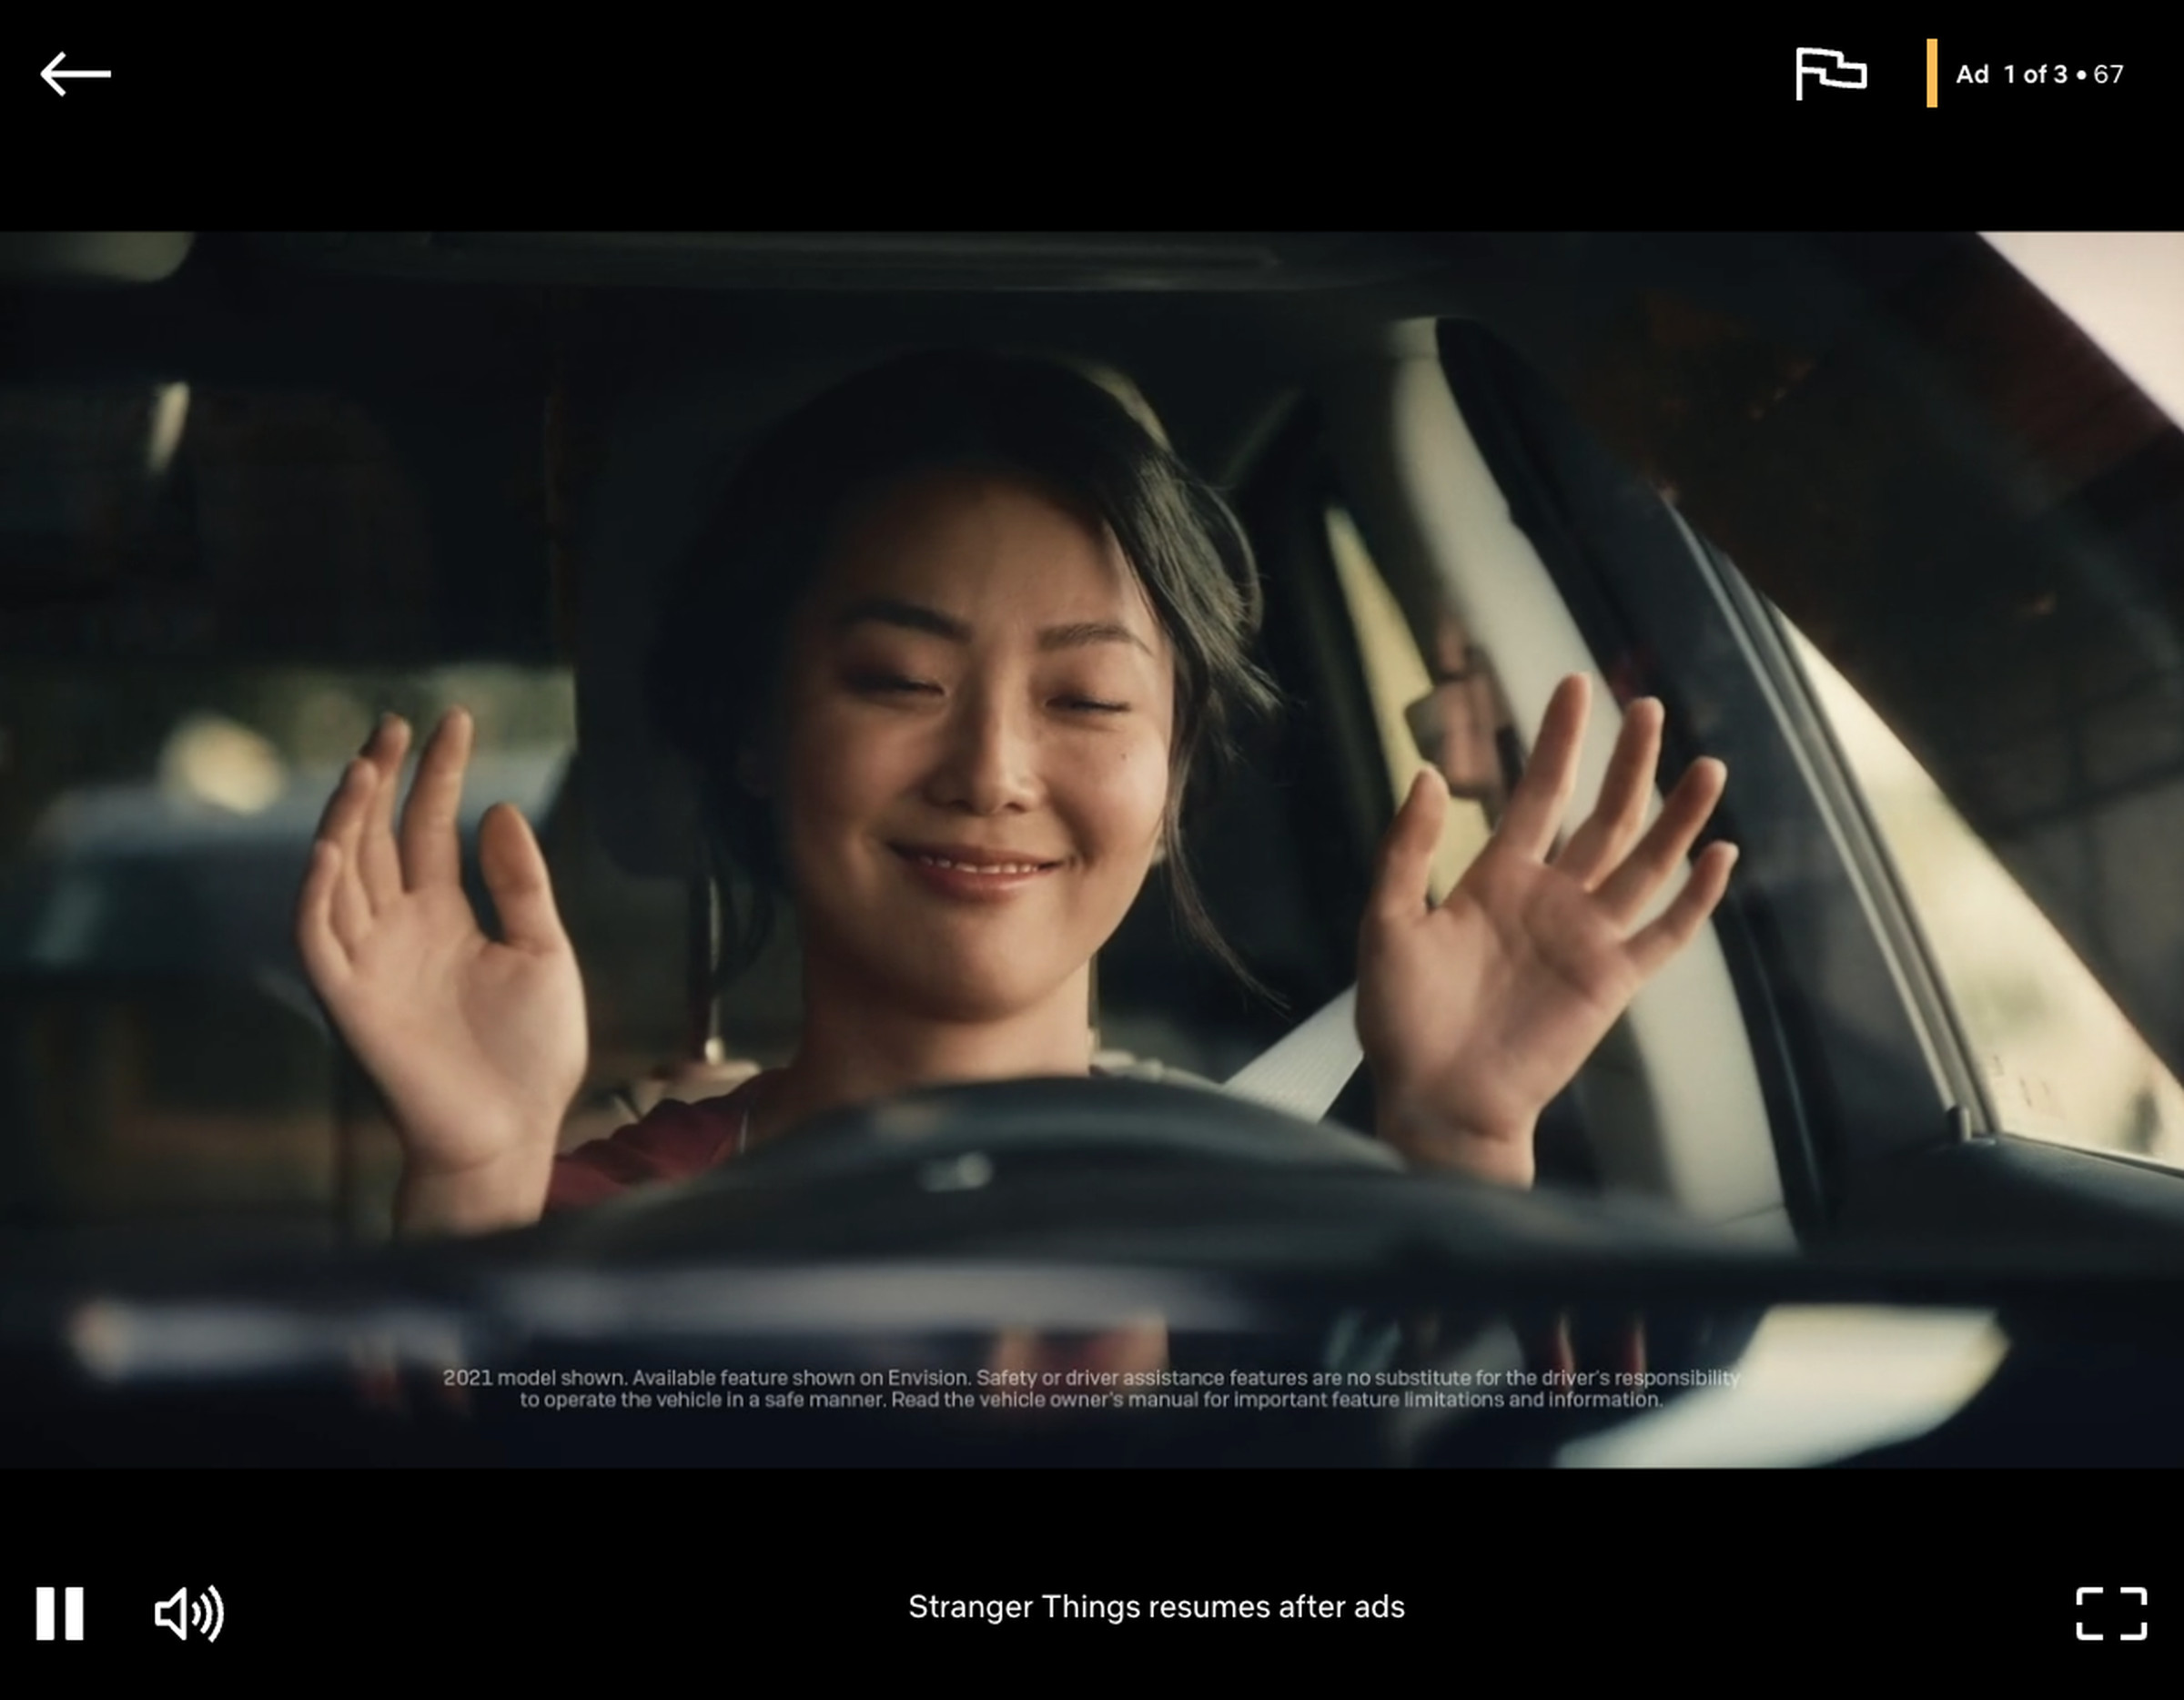 A person is happy in a car in a commercial on Netflix.